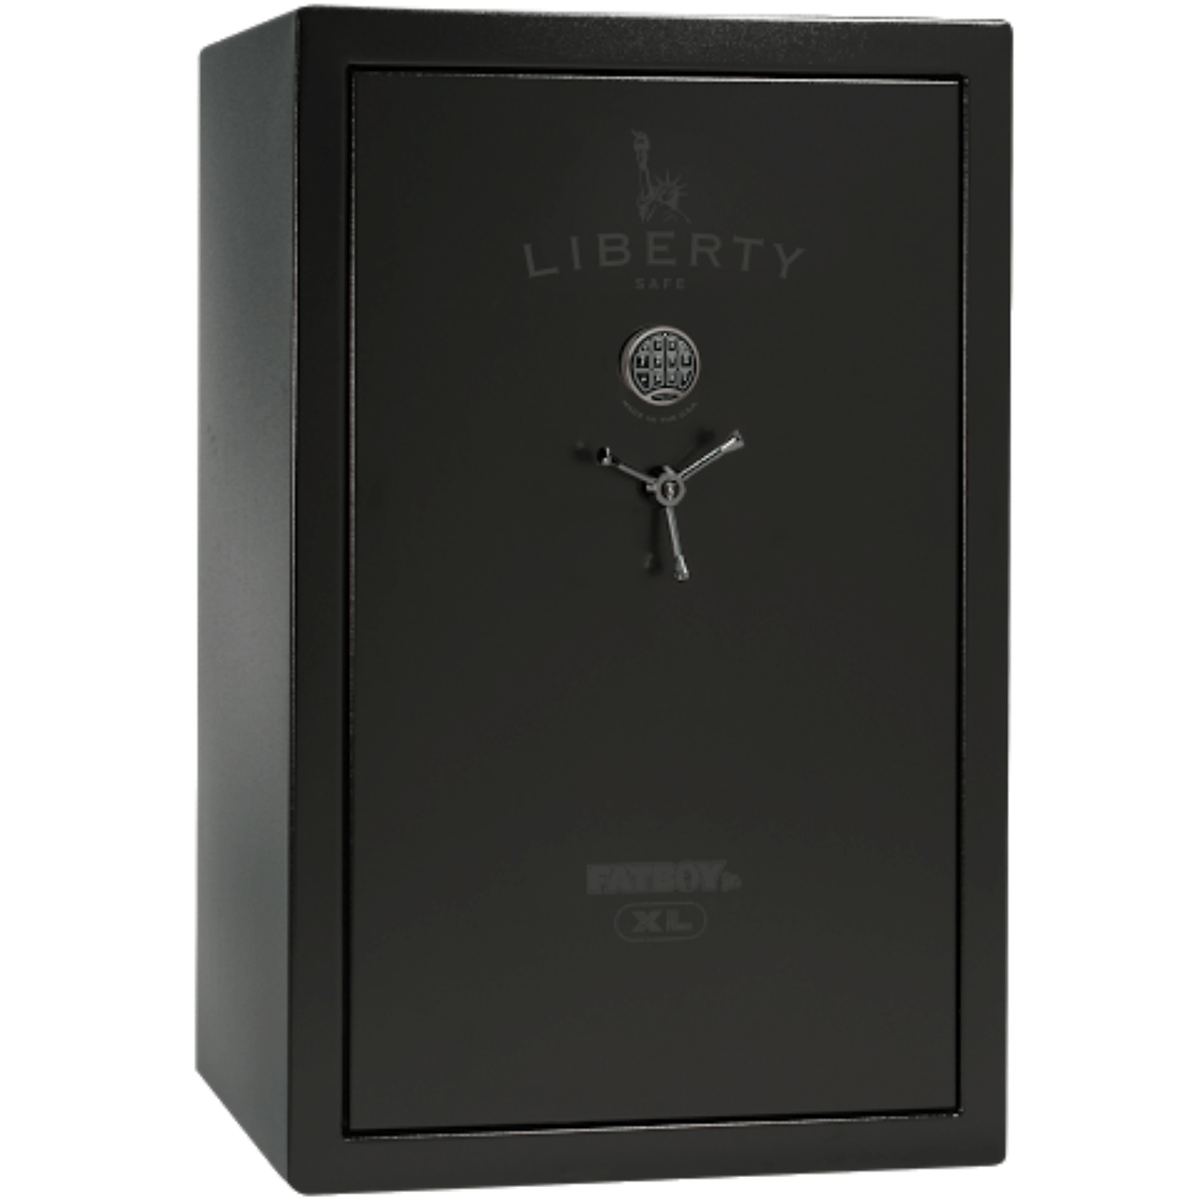 Fatboy Junior XL Safe in Textured Black with Black Chrome Electronic Lock.